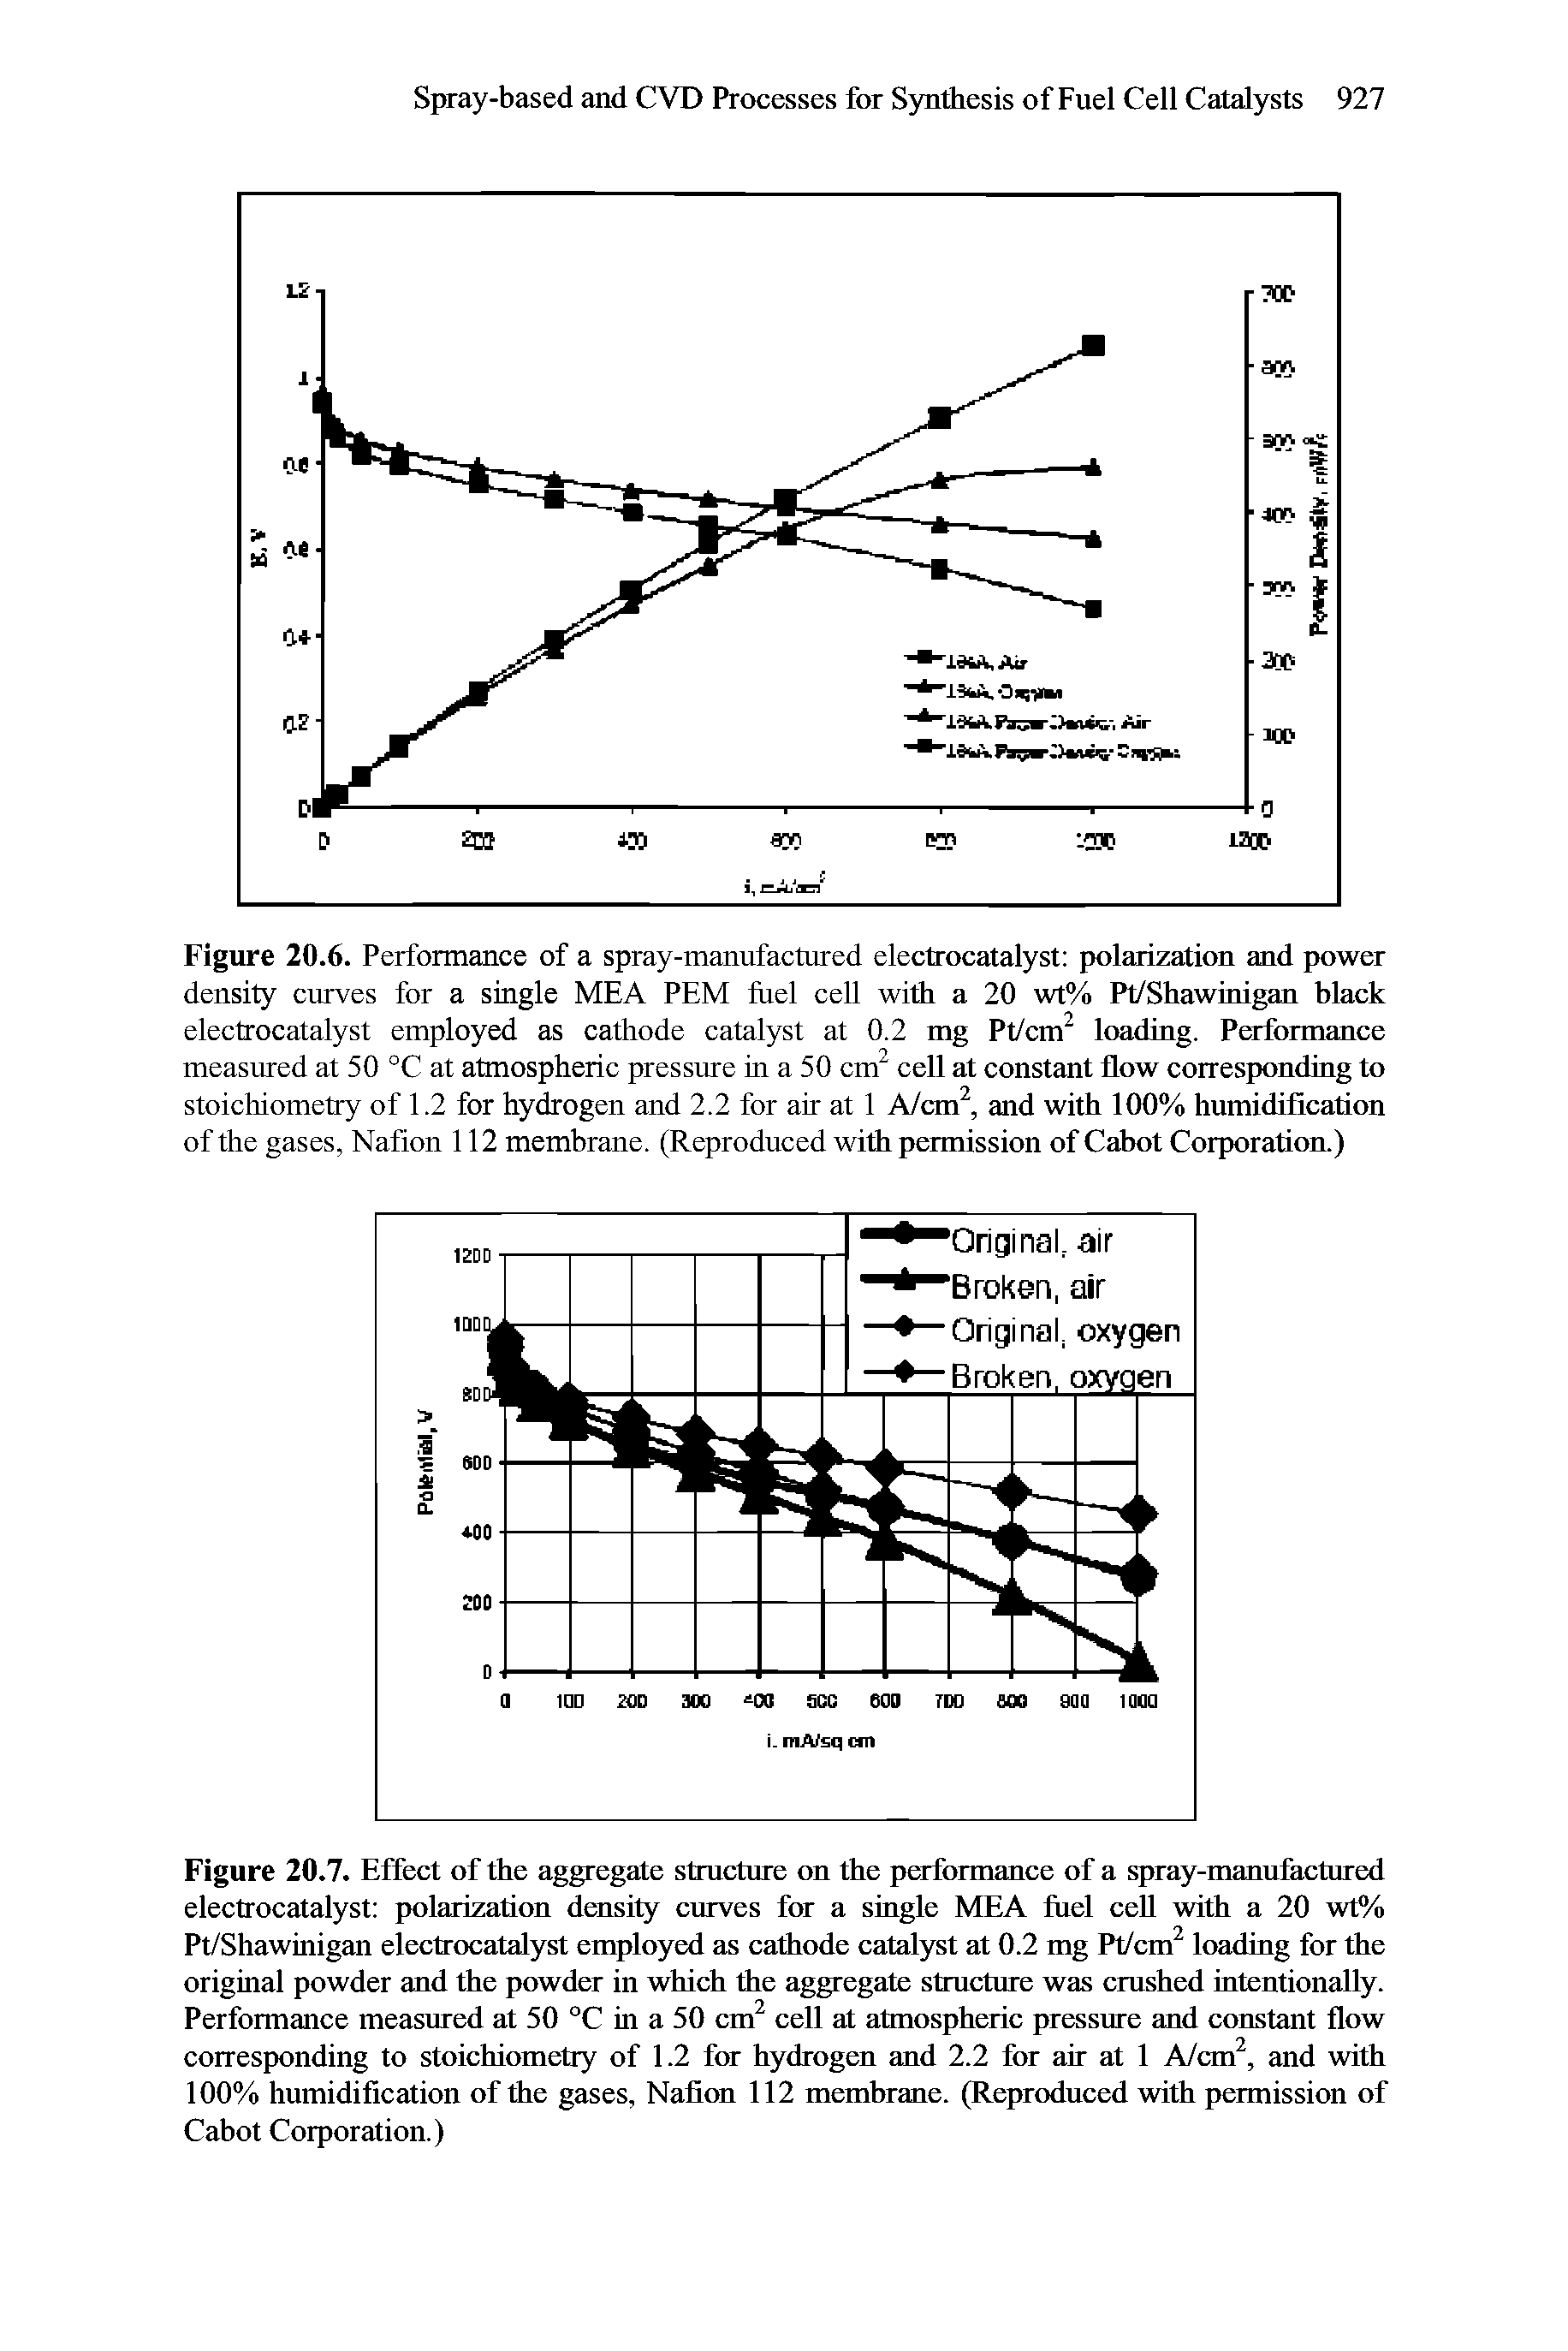 Figure 20.6. Performance of a spray-manufactured electrocatalyst polarization and power density curves for a single MEA PEM fuel cell with a 20 wt% Pt/Shawinigan black electrocatalyst employed as cathode catalyst at 0.2 mg Pt/cm loading. Performance measured at 50 °C at atmospheric pressure in a 50 cm cell at constant flow corresponding to stoichiometry of 1.2 for hydrogen and 2.2 for air at 1 A/cm, and with 100% humidification of the gases, Nation 112 membrane. (Reproduced with permission of Cabot CorporatioiL)...